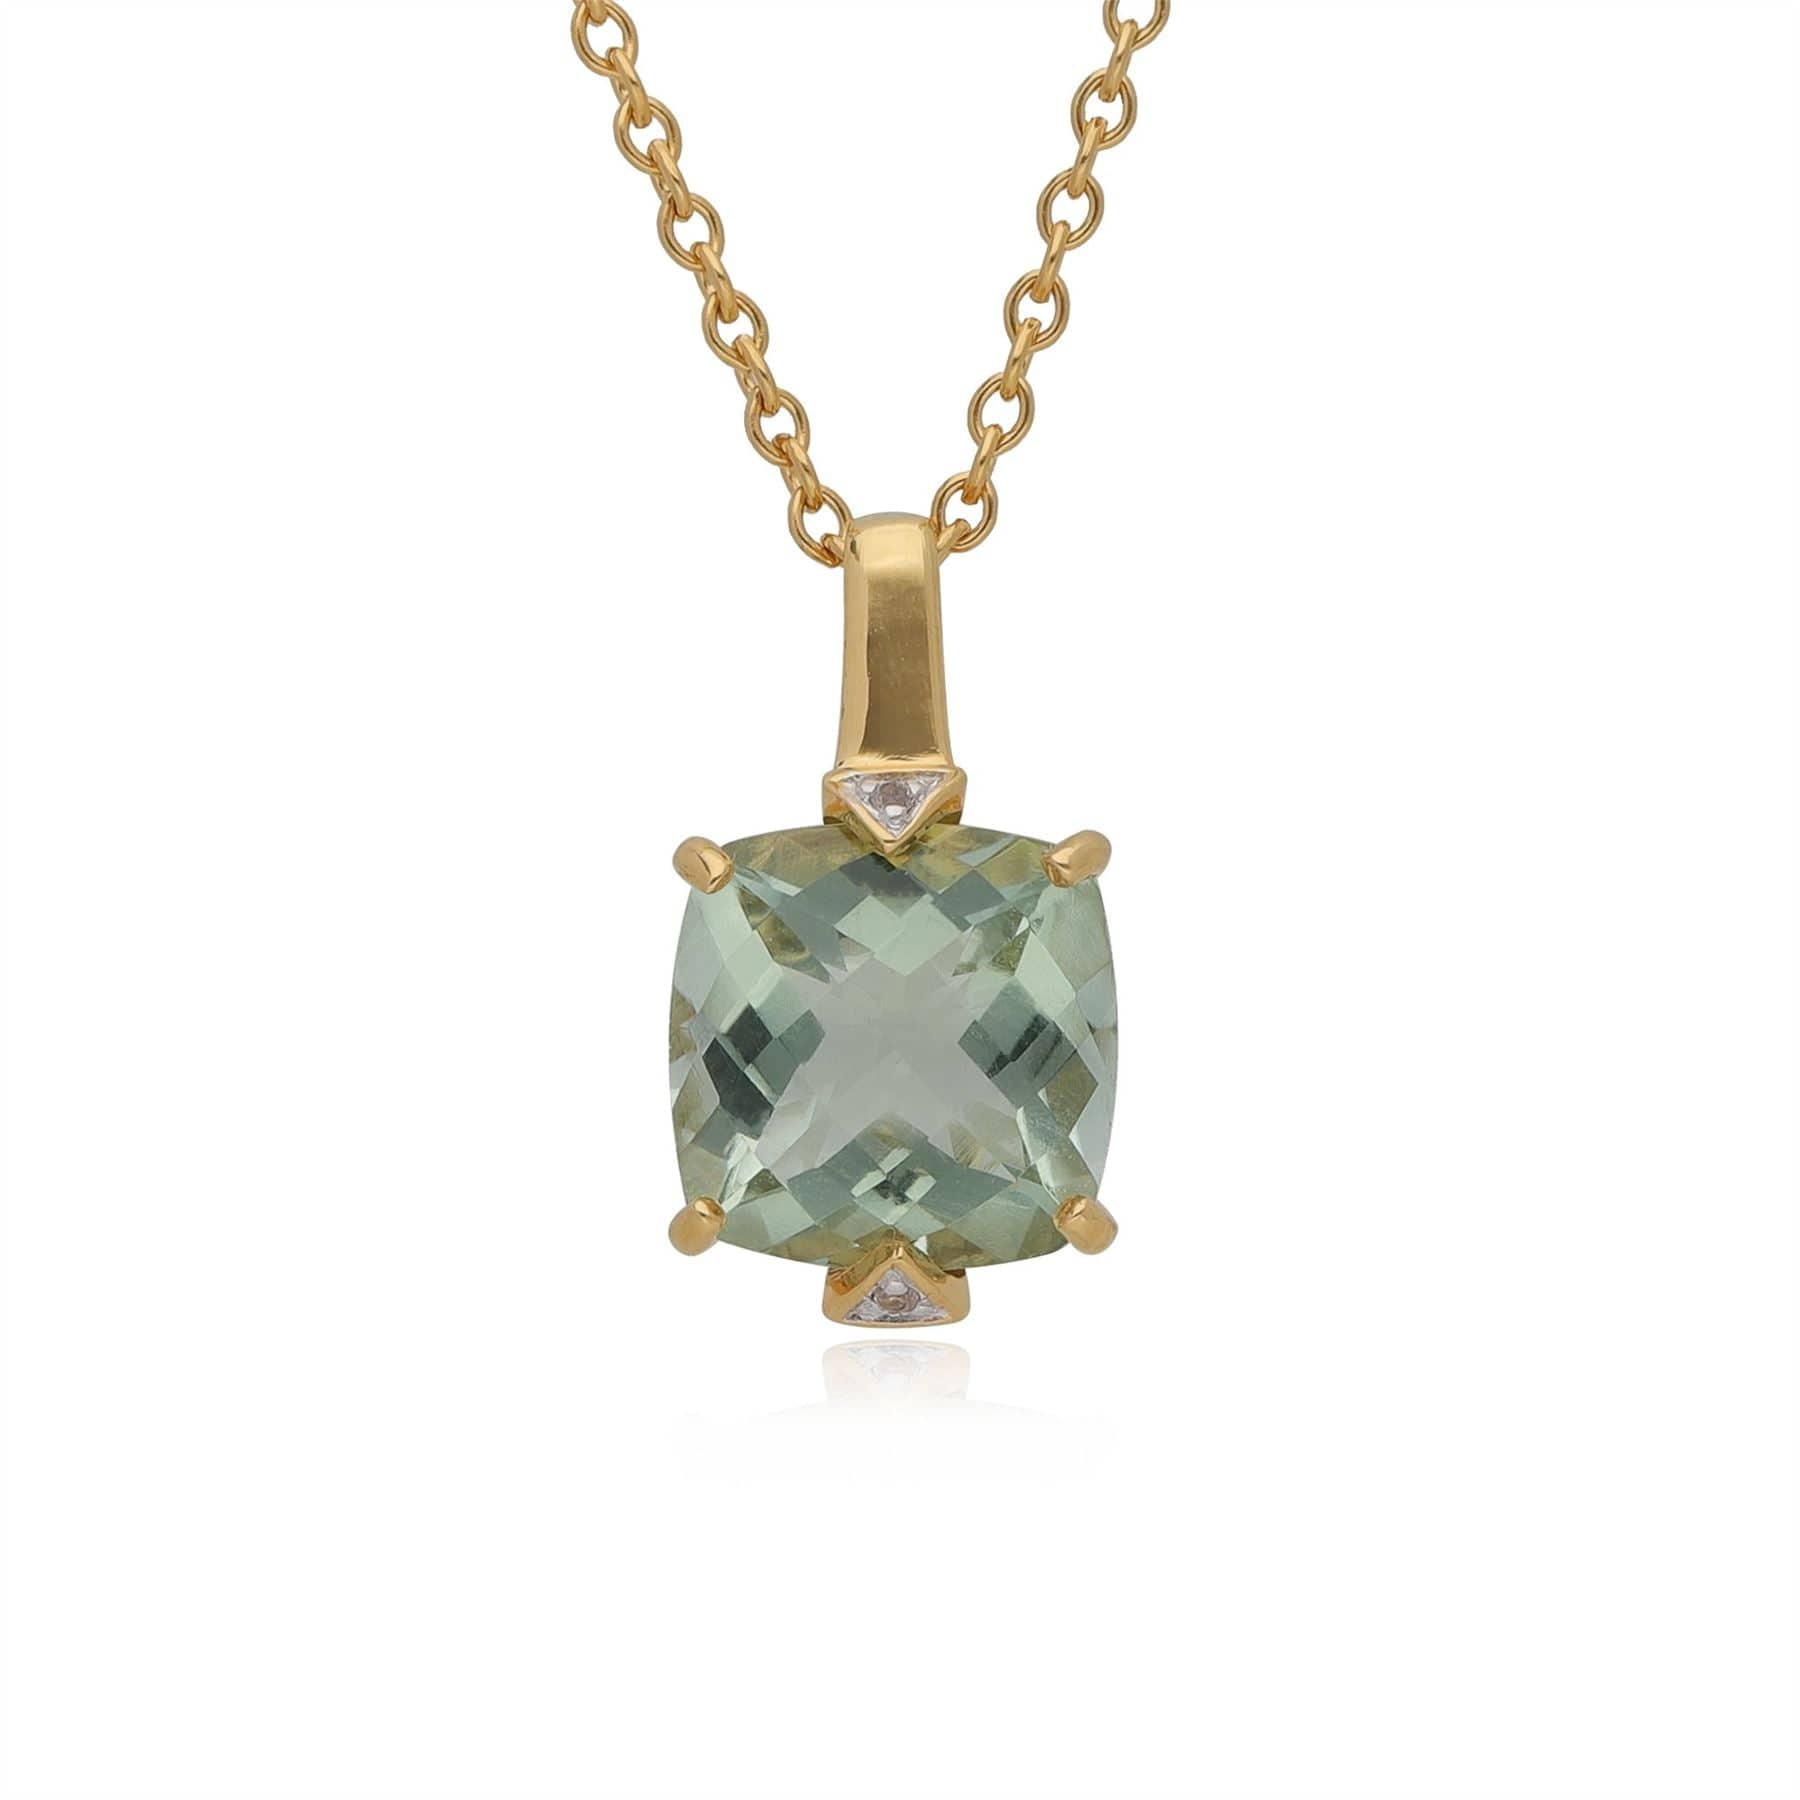 Kosmos Square Mint Quartz & Topaz Necklace in Gold Plated Sterling Silver - Gemondo